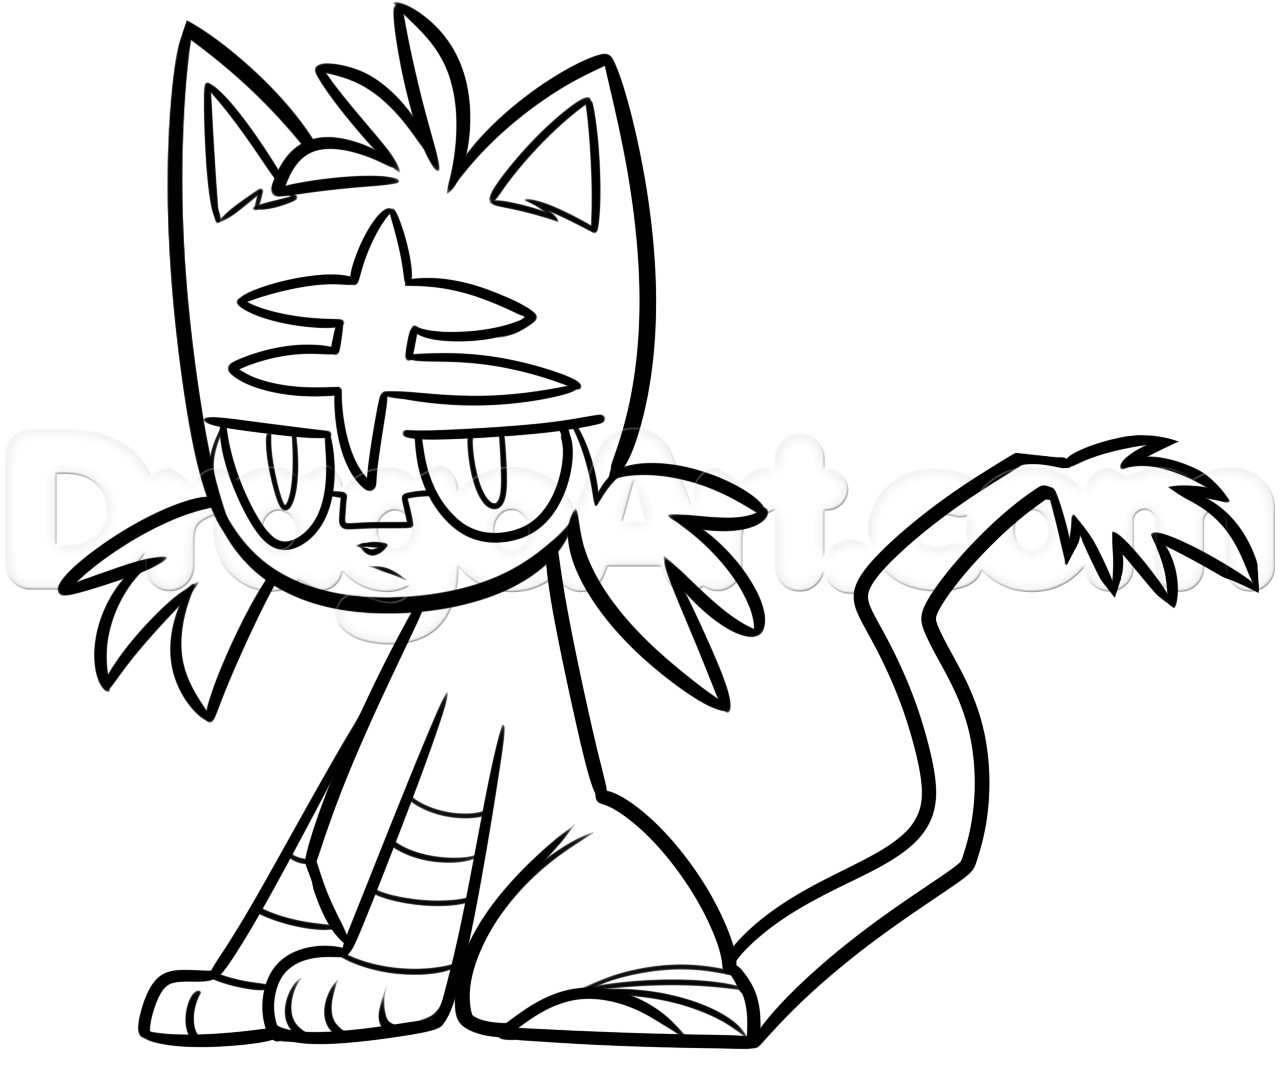 Now Litten Coloring Pages Pokemon Drawing ClipartXtras